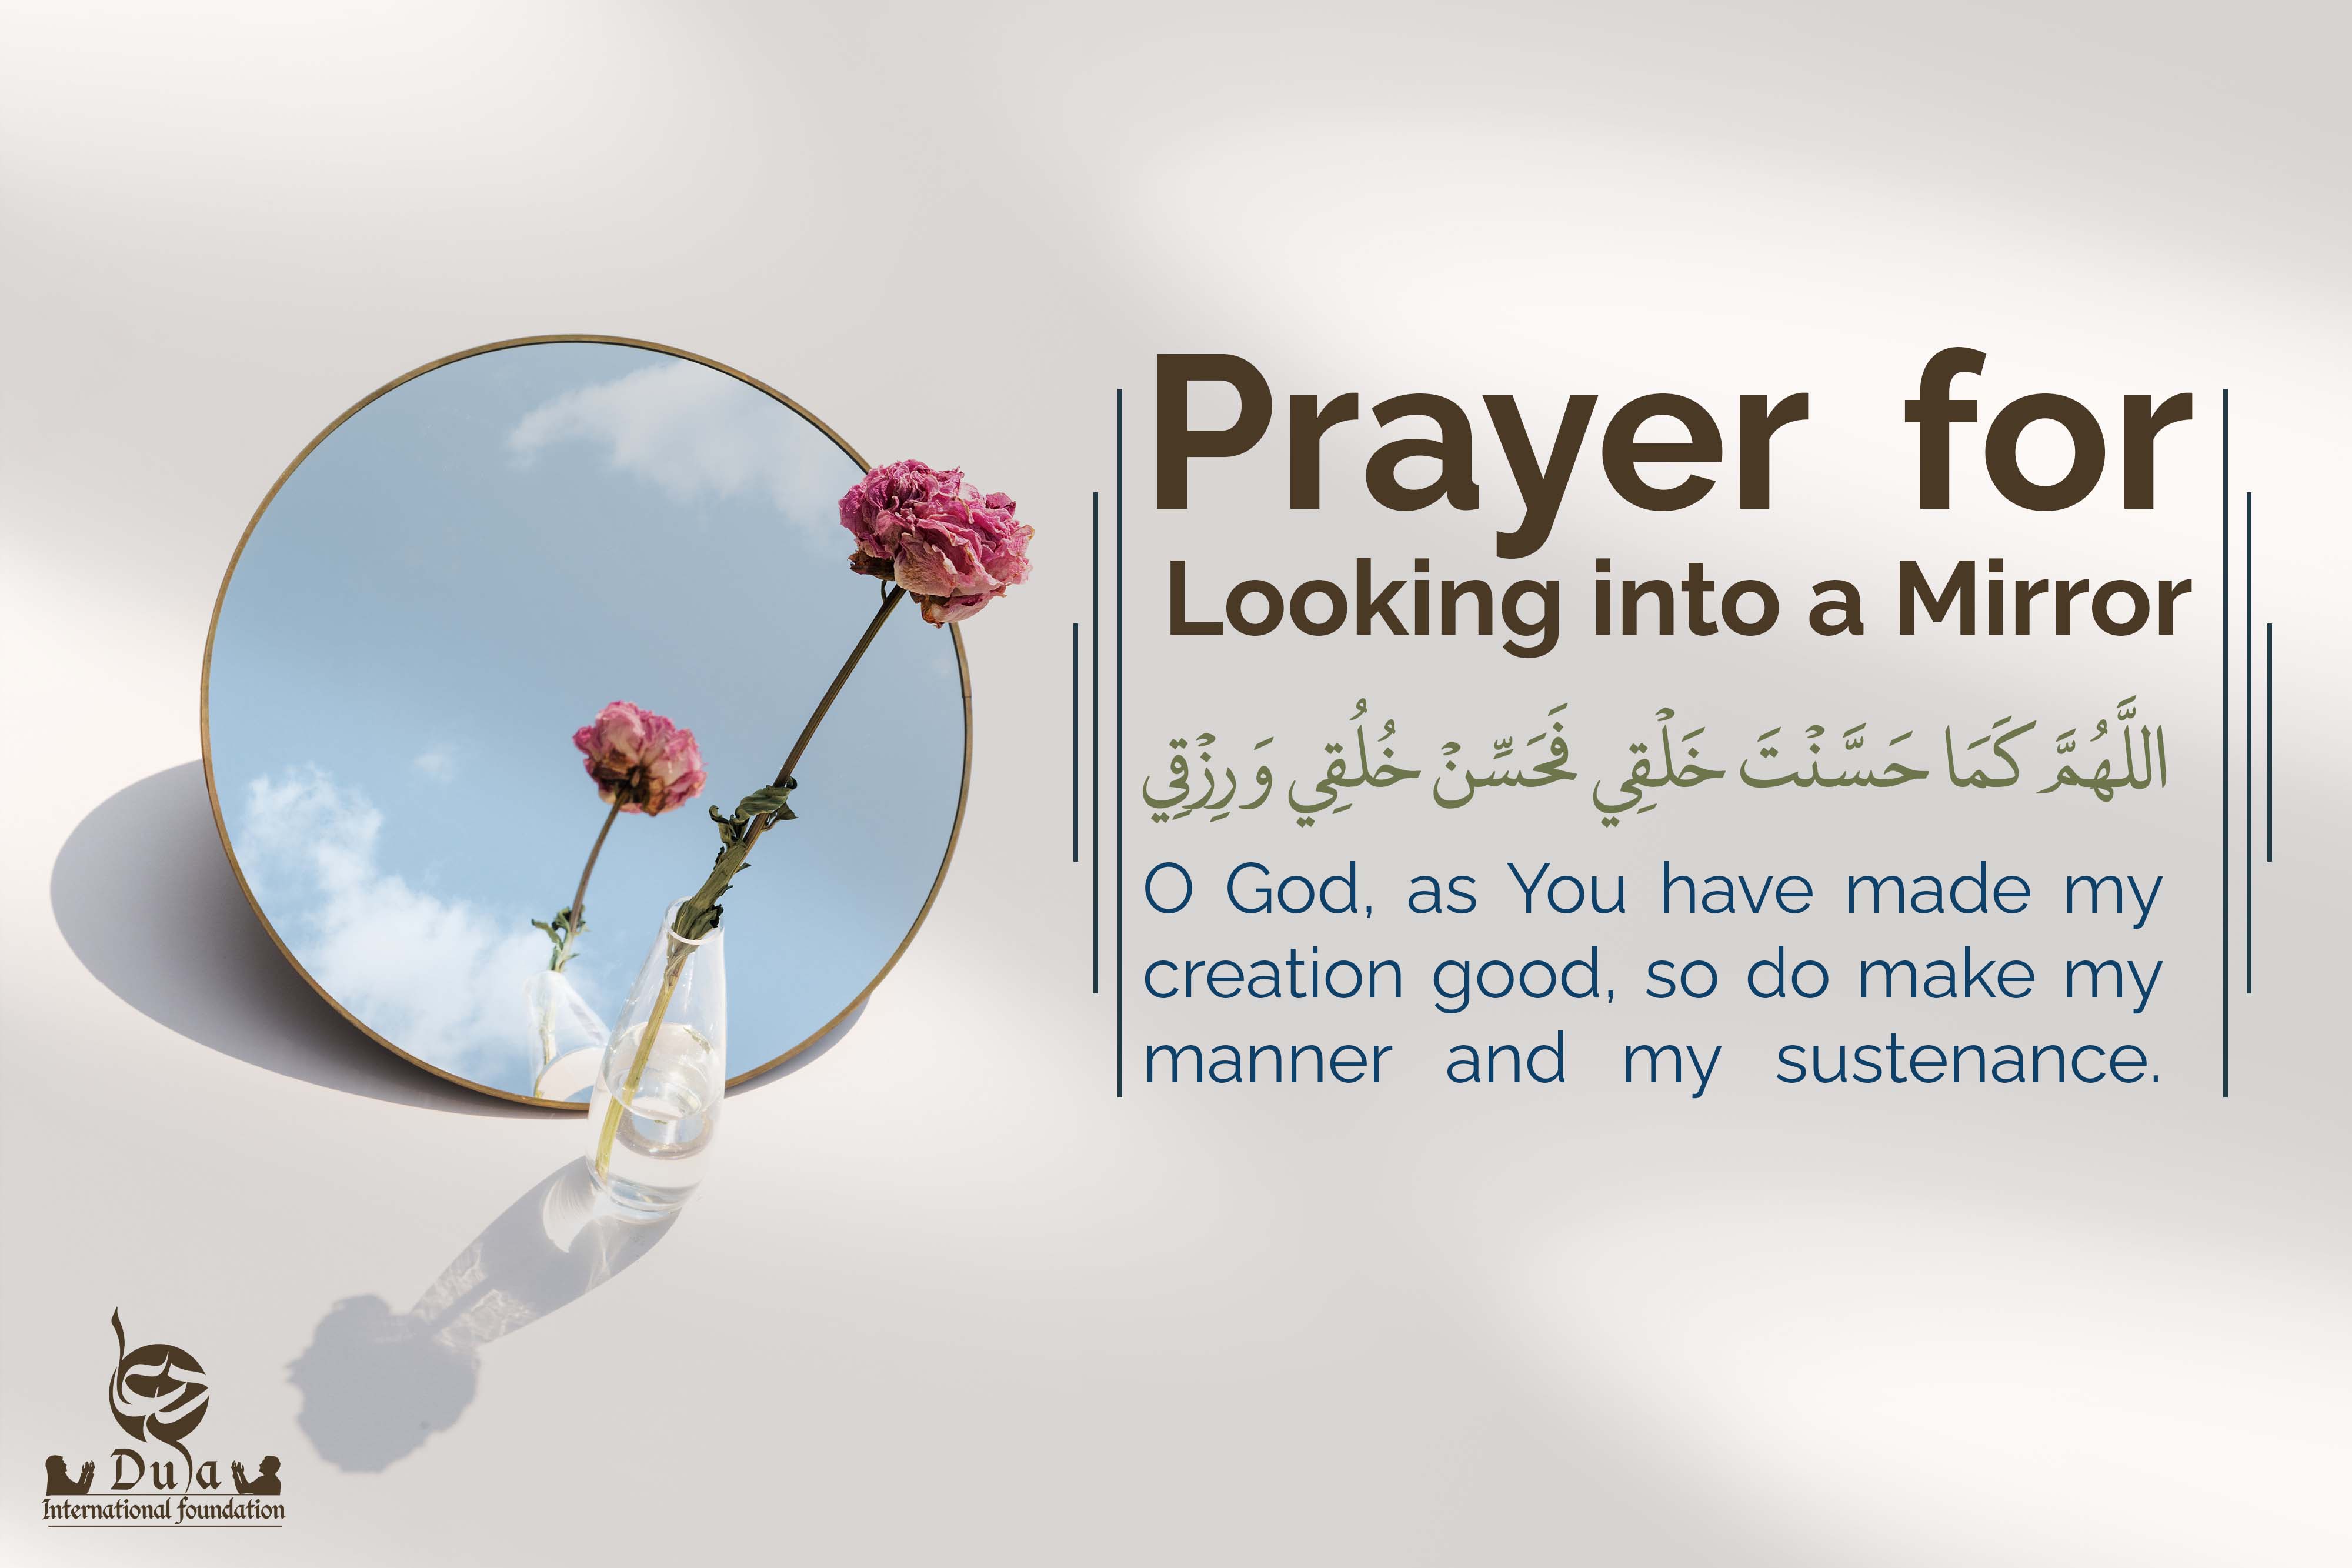  Prayer for Looking into a Mirror